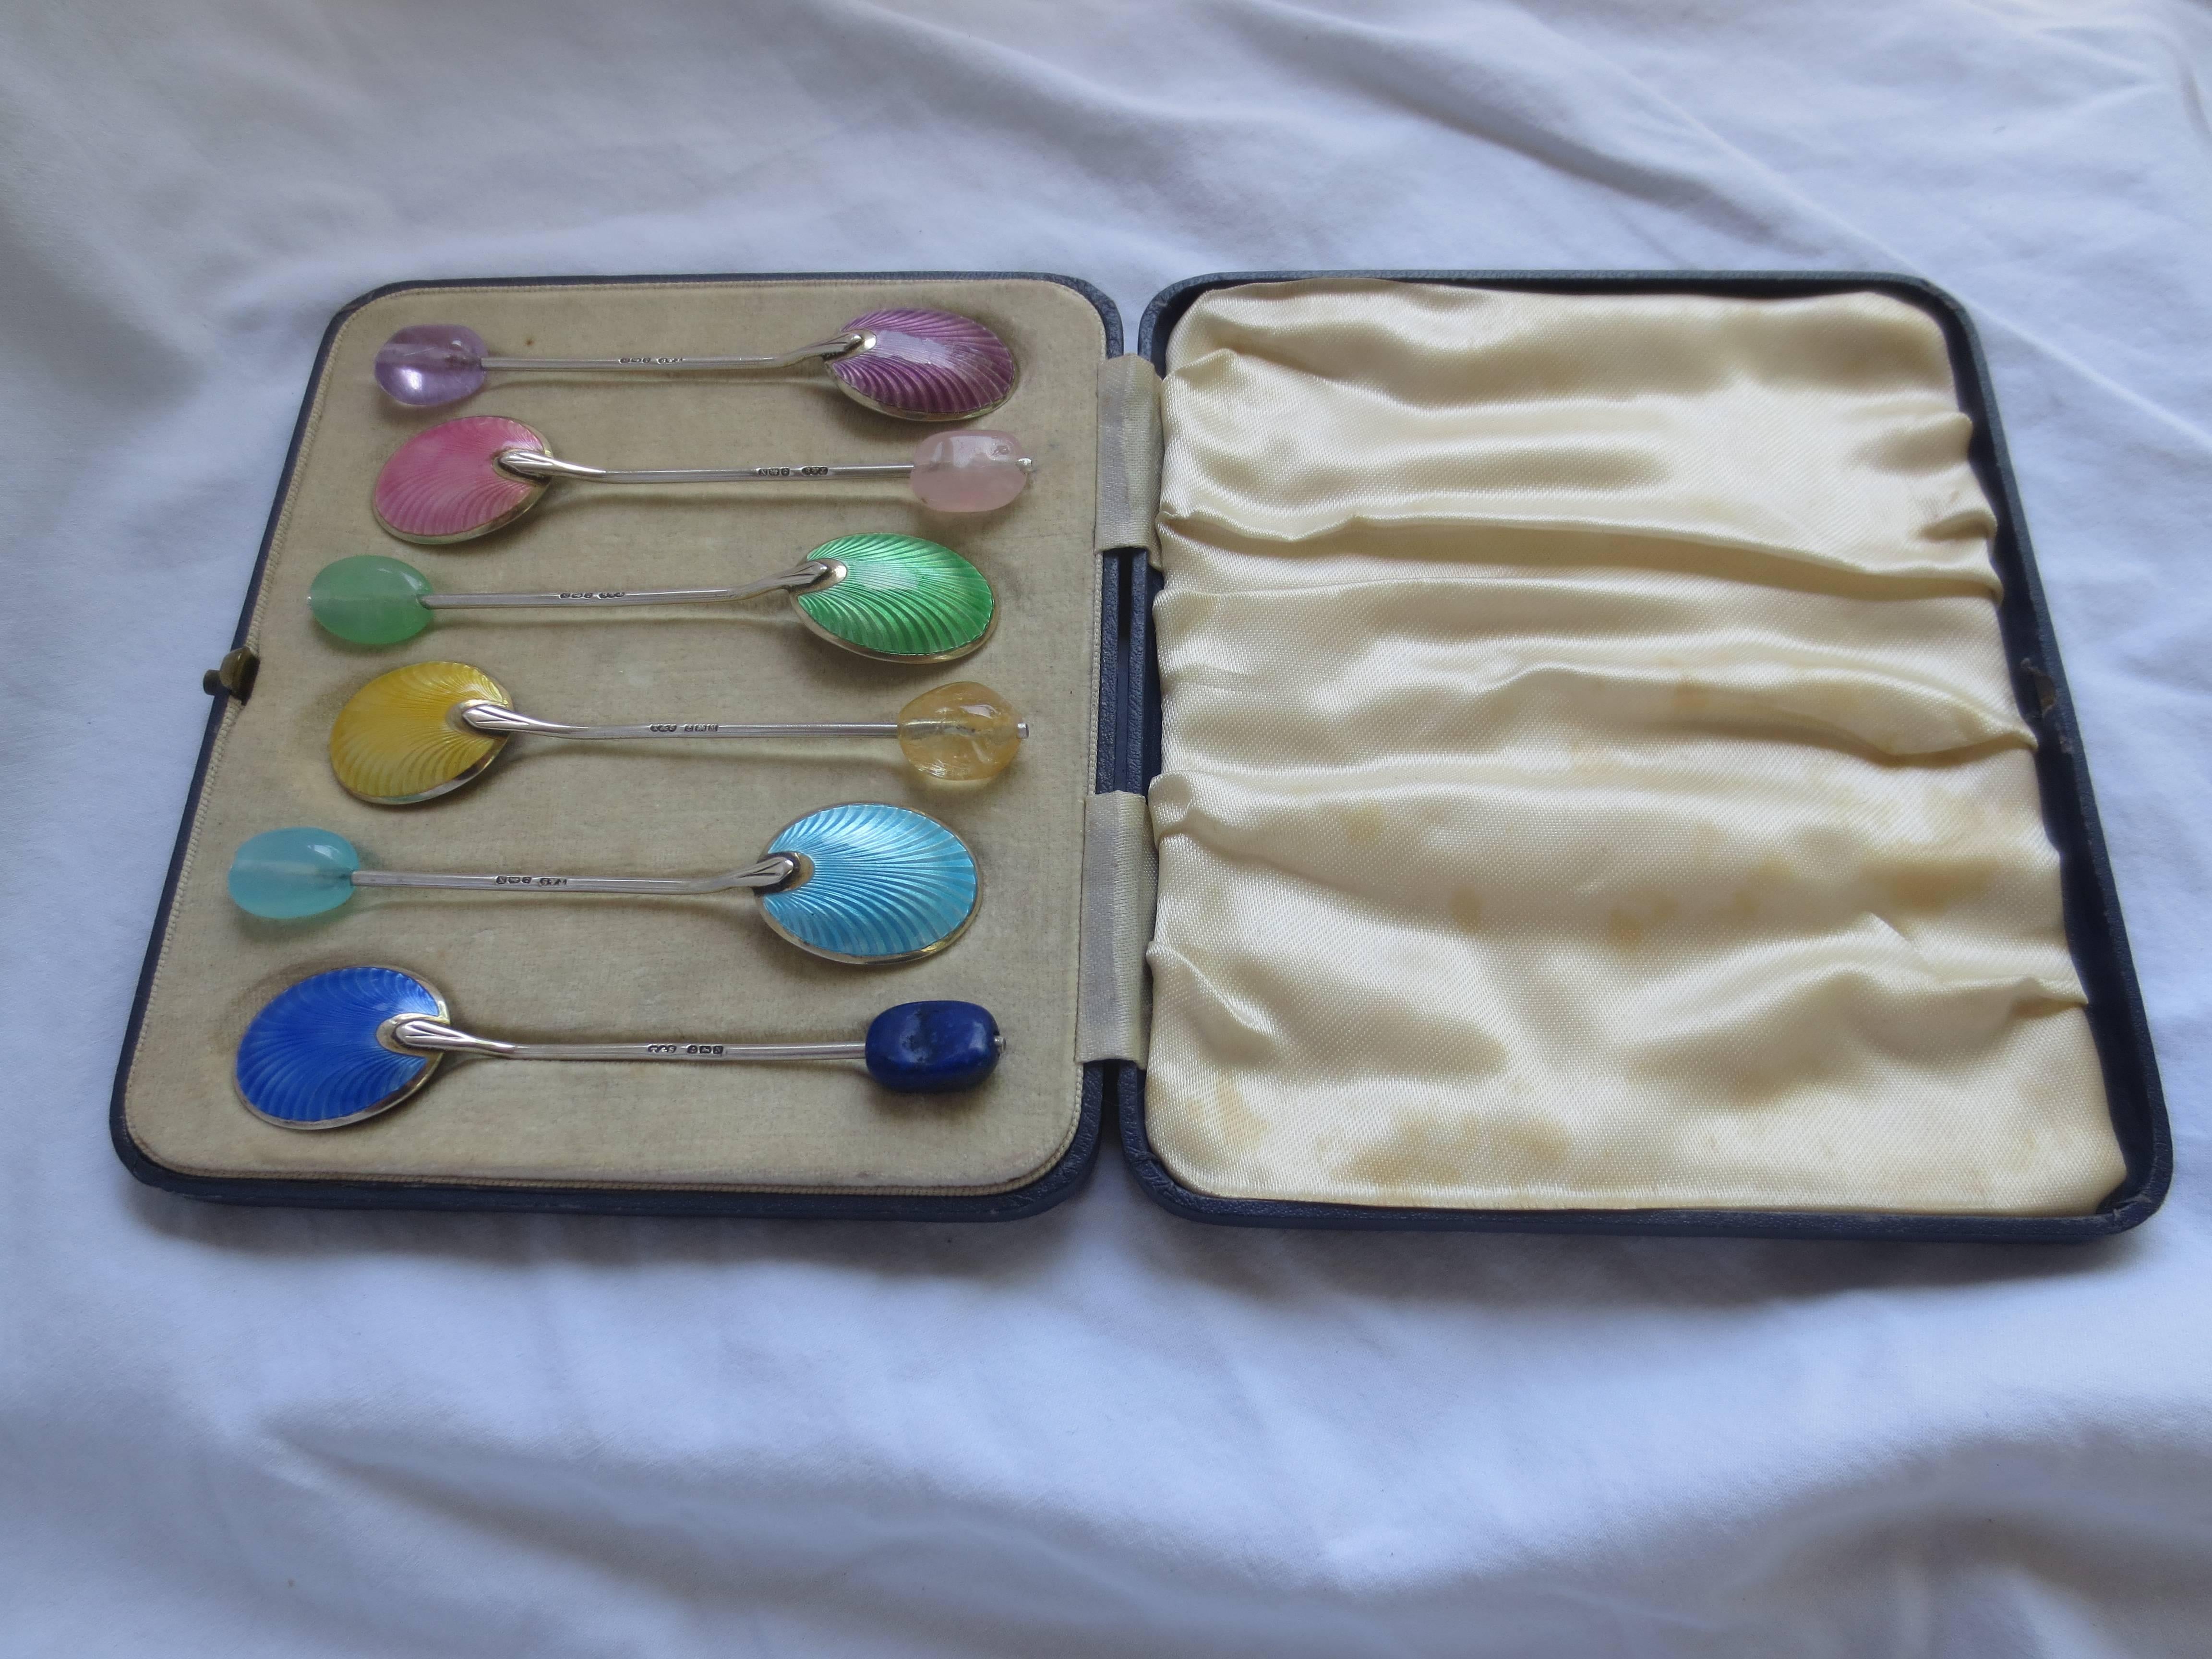 Arts and Crafts One-of-a-kind Enameled Silver Spoons Refurbished with Semi precious stone beads.